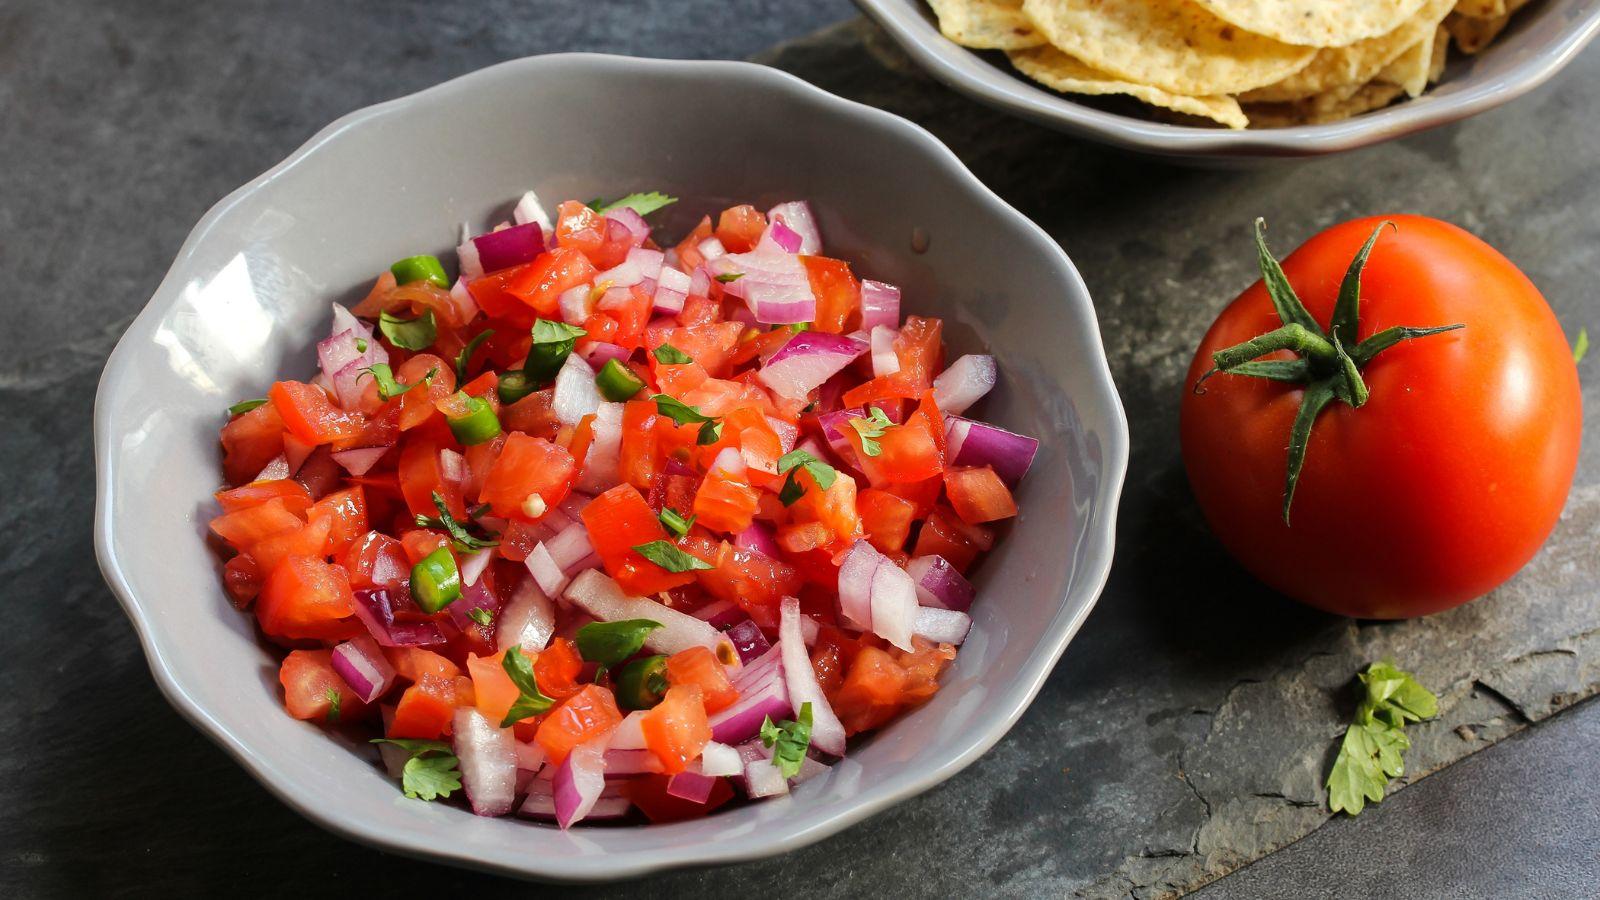 A homemade salsa wiht tomatoes, red onion, jalapeno and cilantro in a grayish bowl and a tomato to the right hand side.